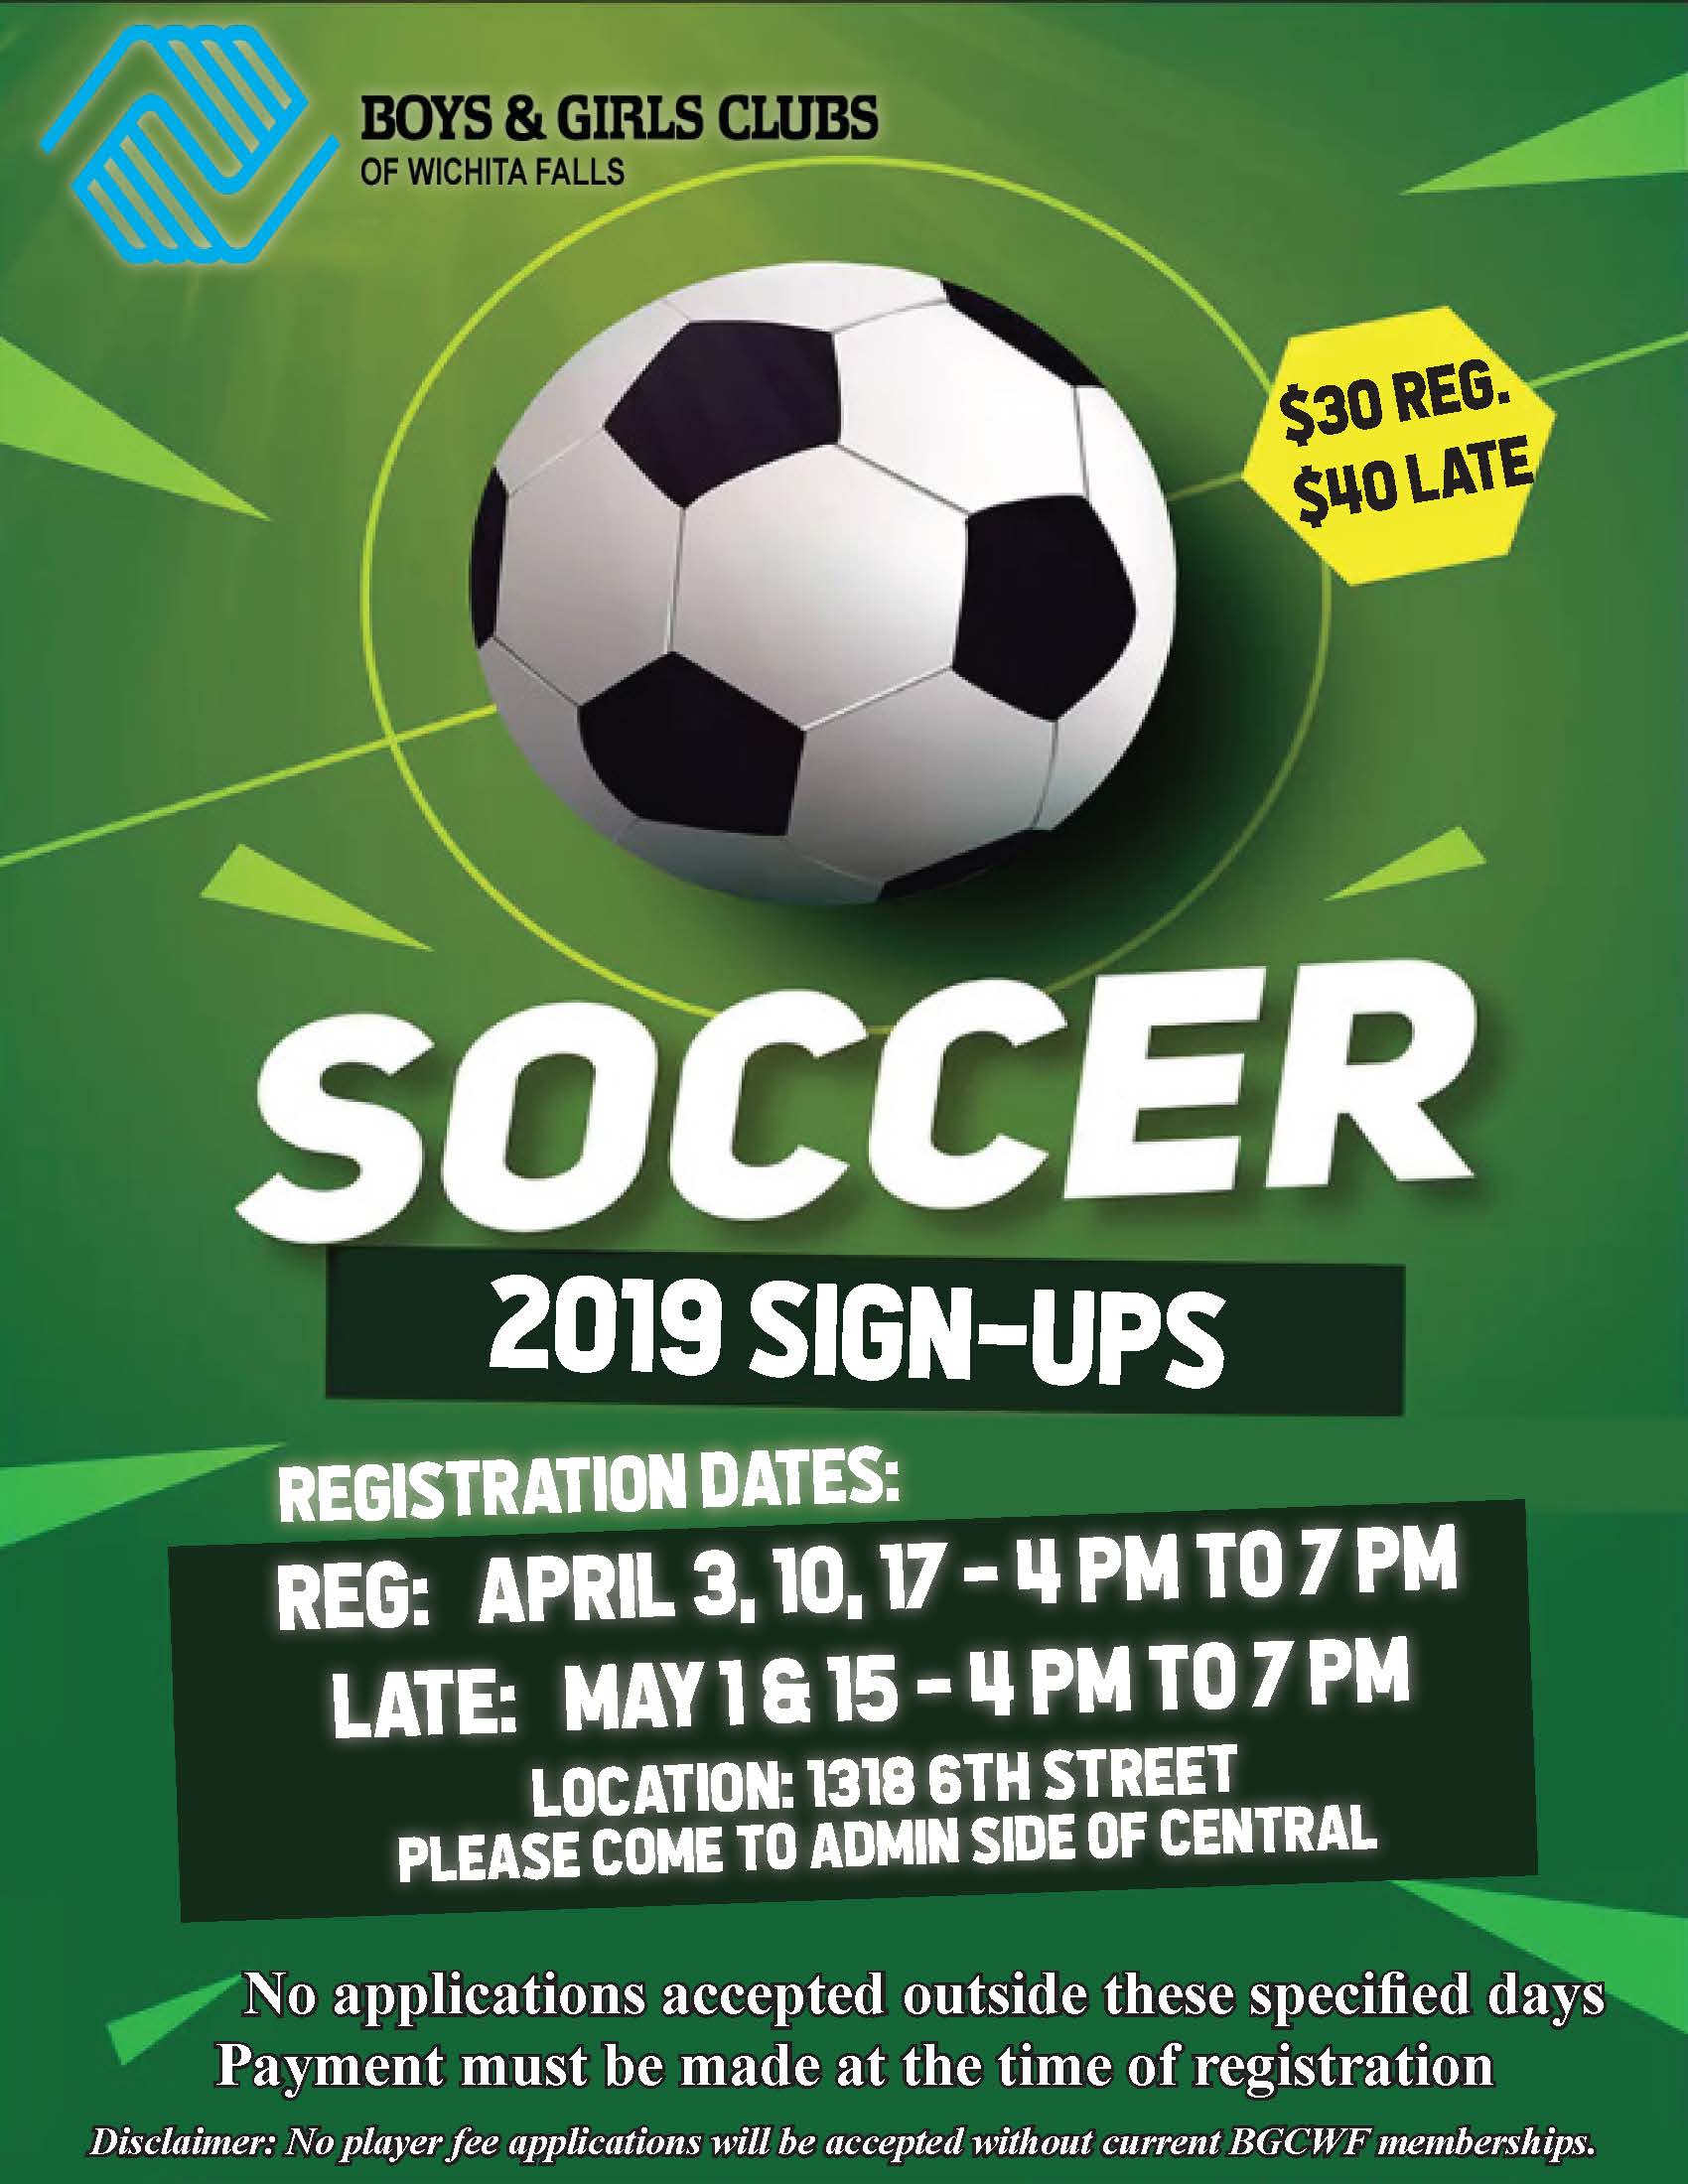 WEDNESDAY IS THE LAST DAY TO SIGN UP FOR INDOOR SOCCER! Boys and